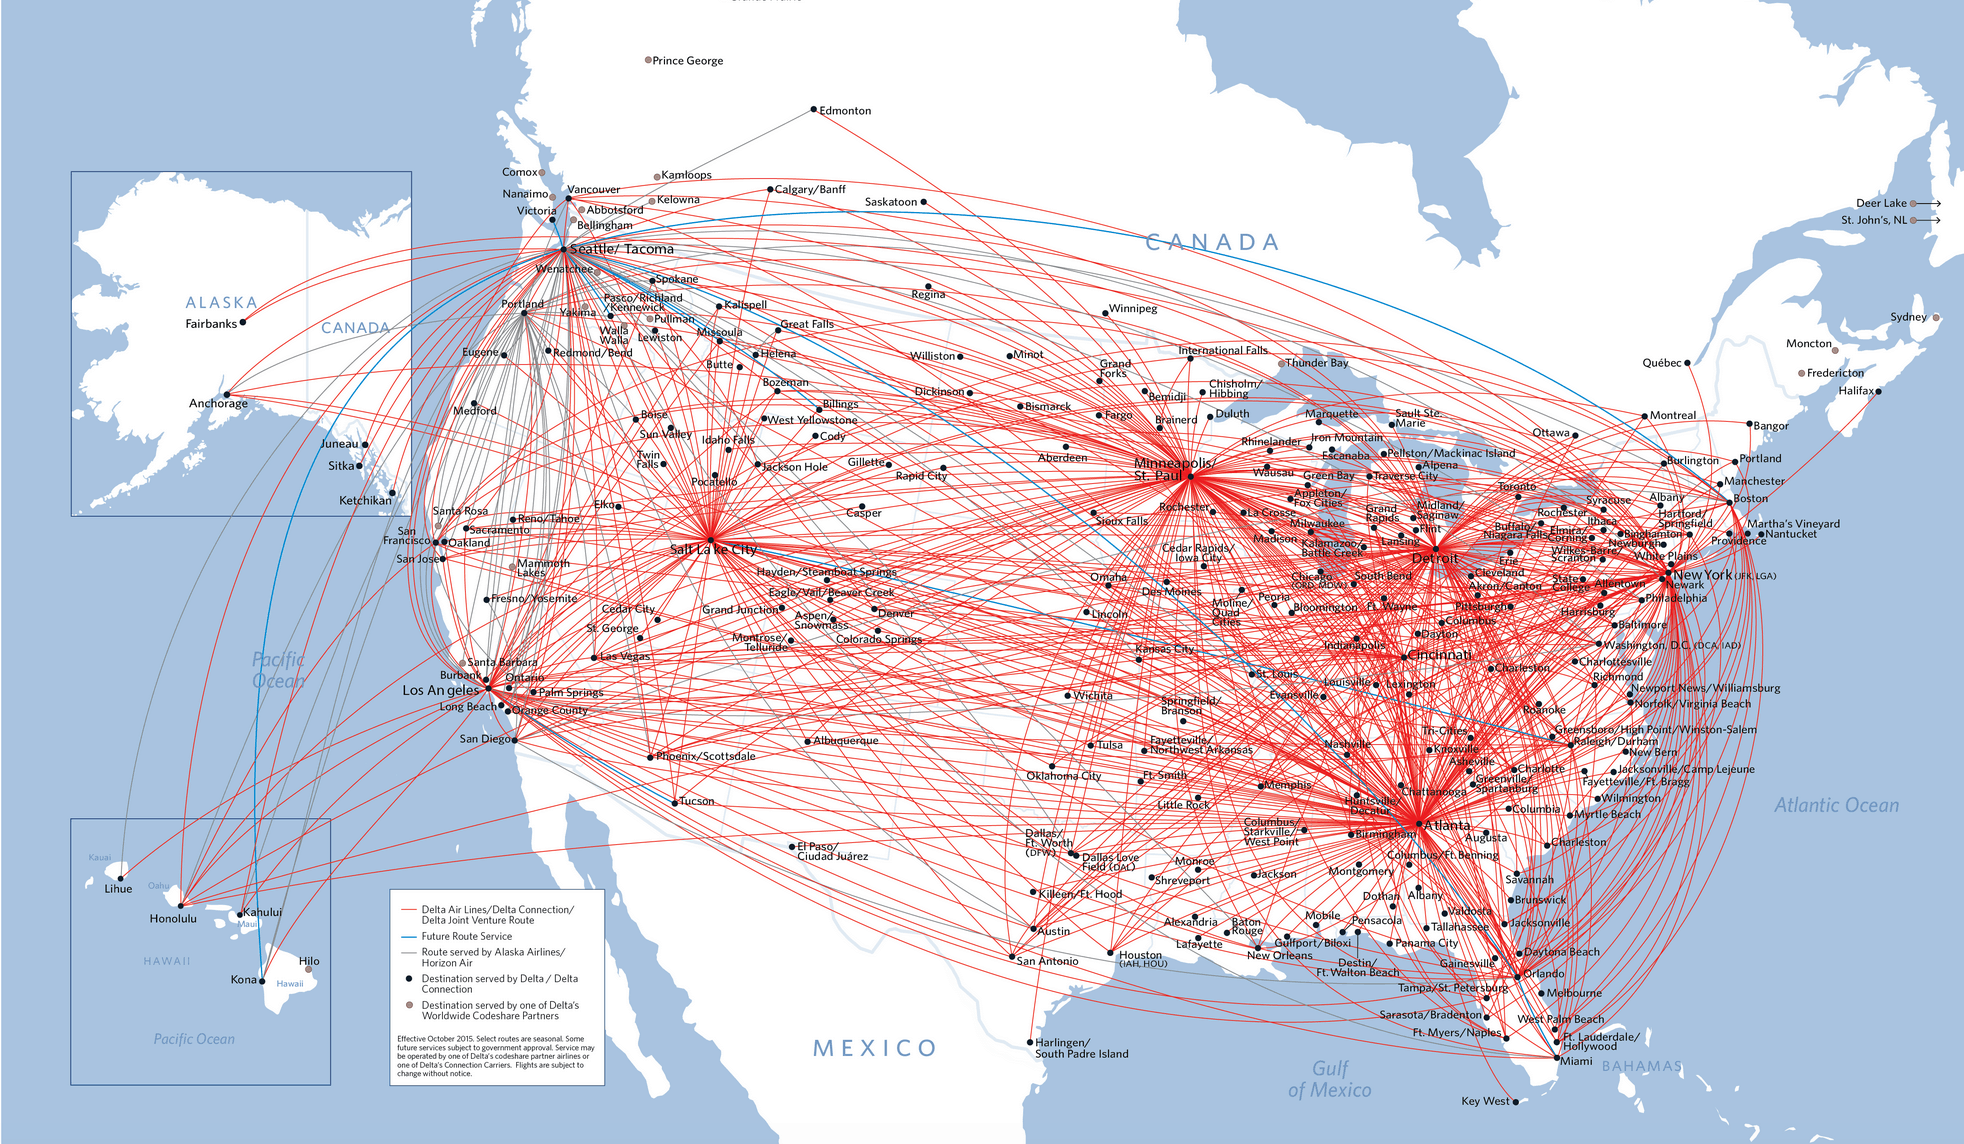 southwest airlines hubs map